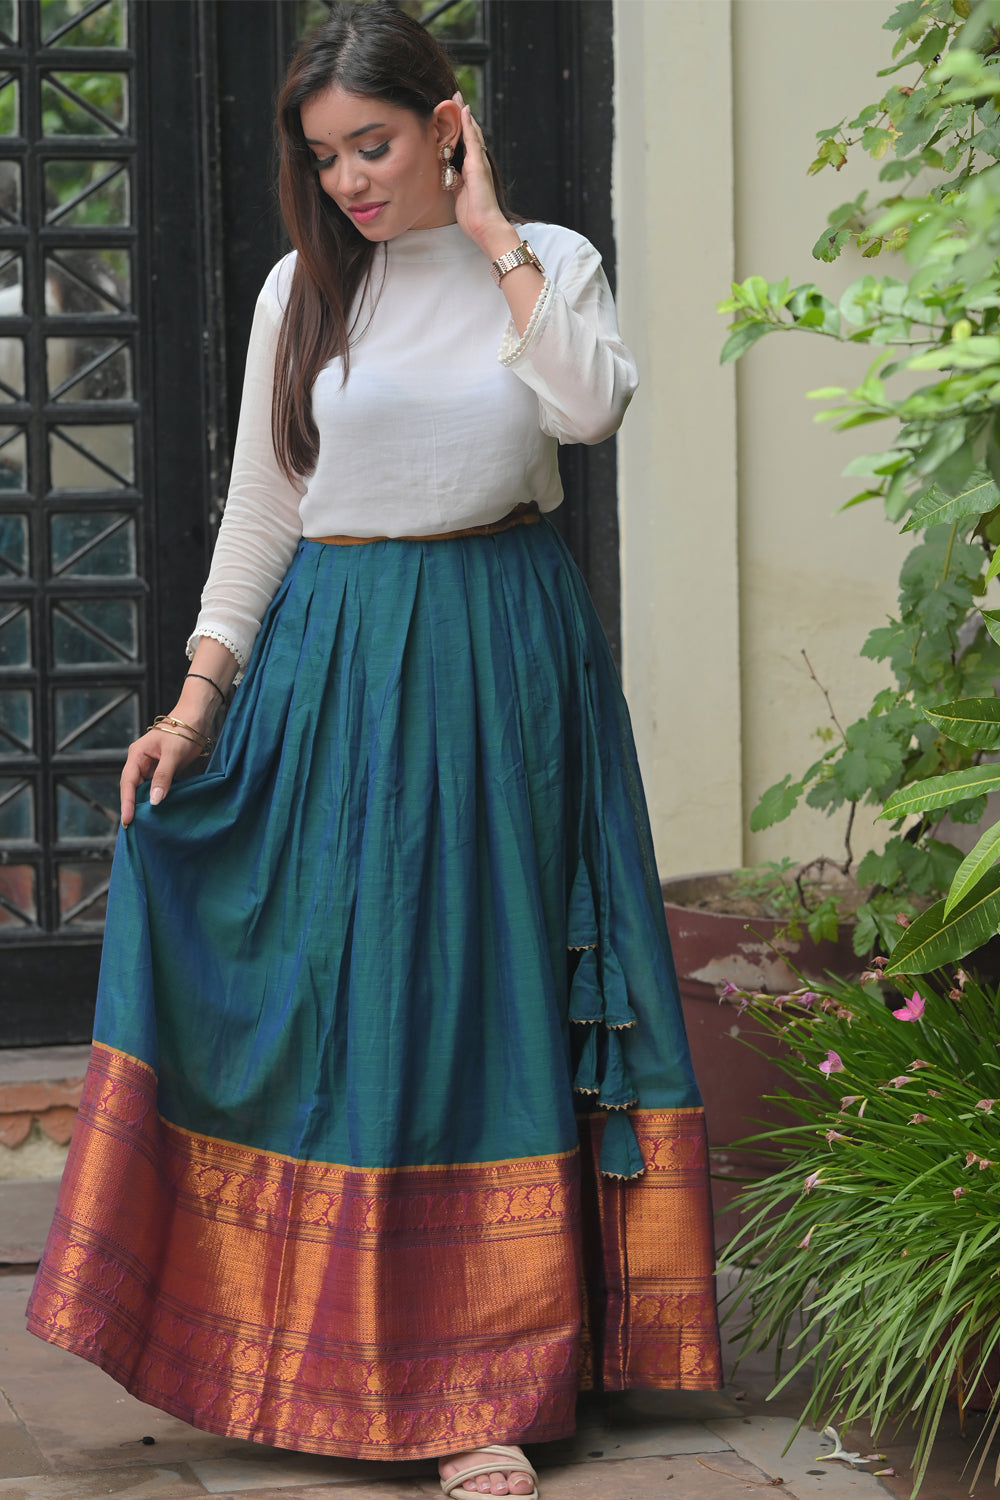 Moor Hues - Peacock Blue Green Pleated skirt with White Georgette Top